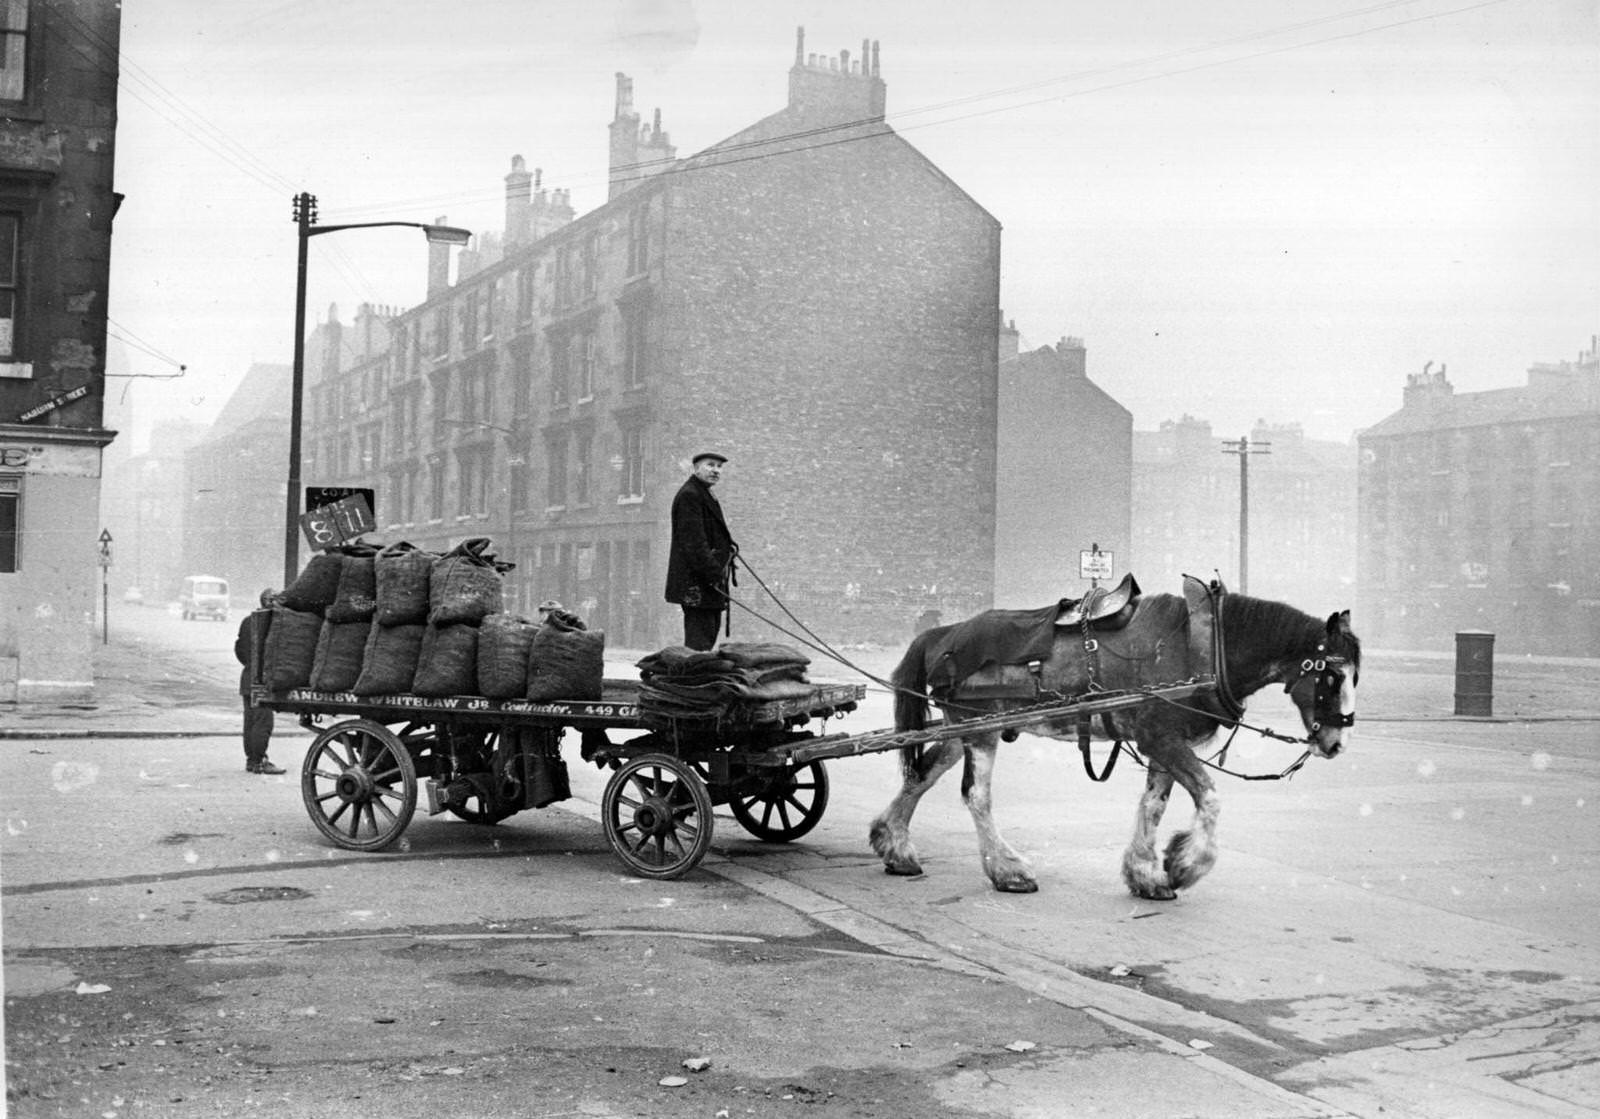 A coalman doing his rounds in his horse-drawn cart in the Gorbals area of Glasgow, 1960